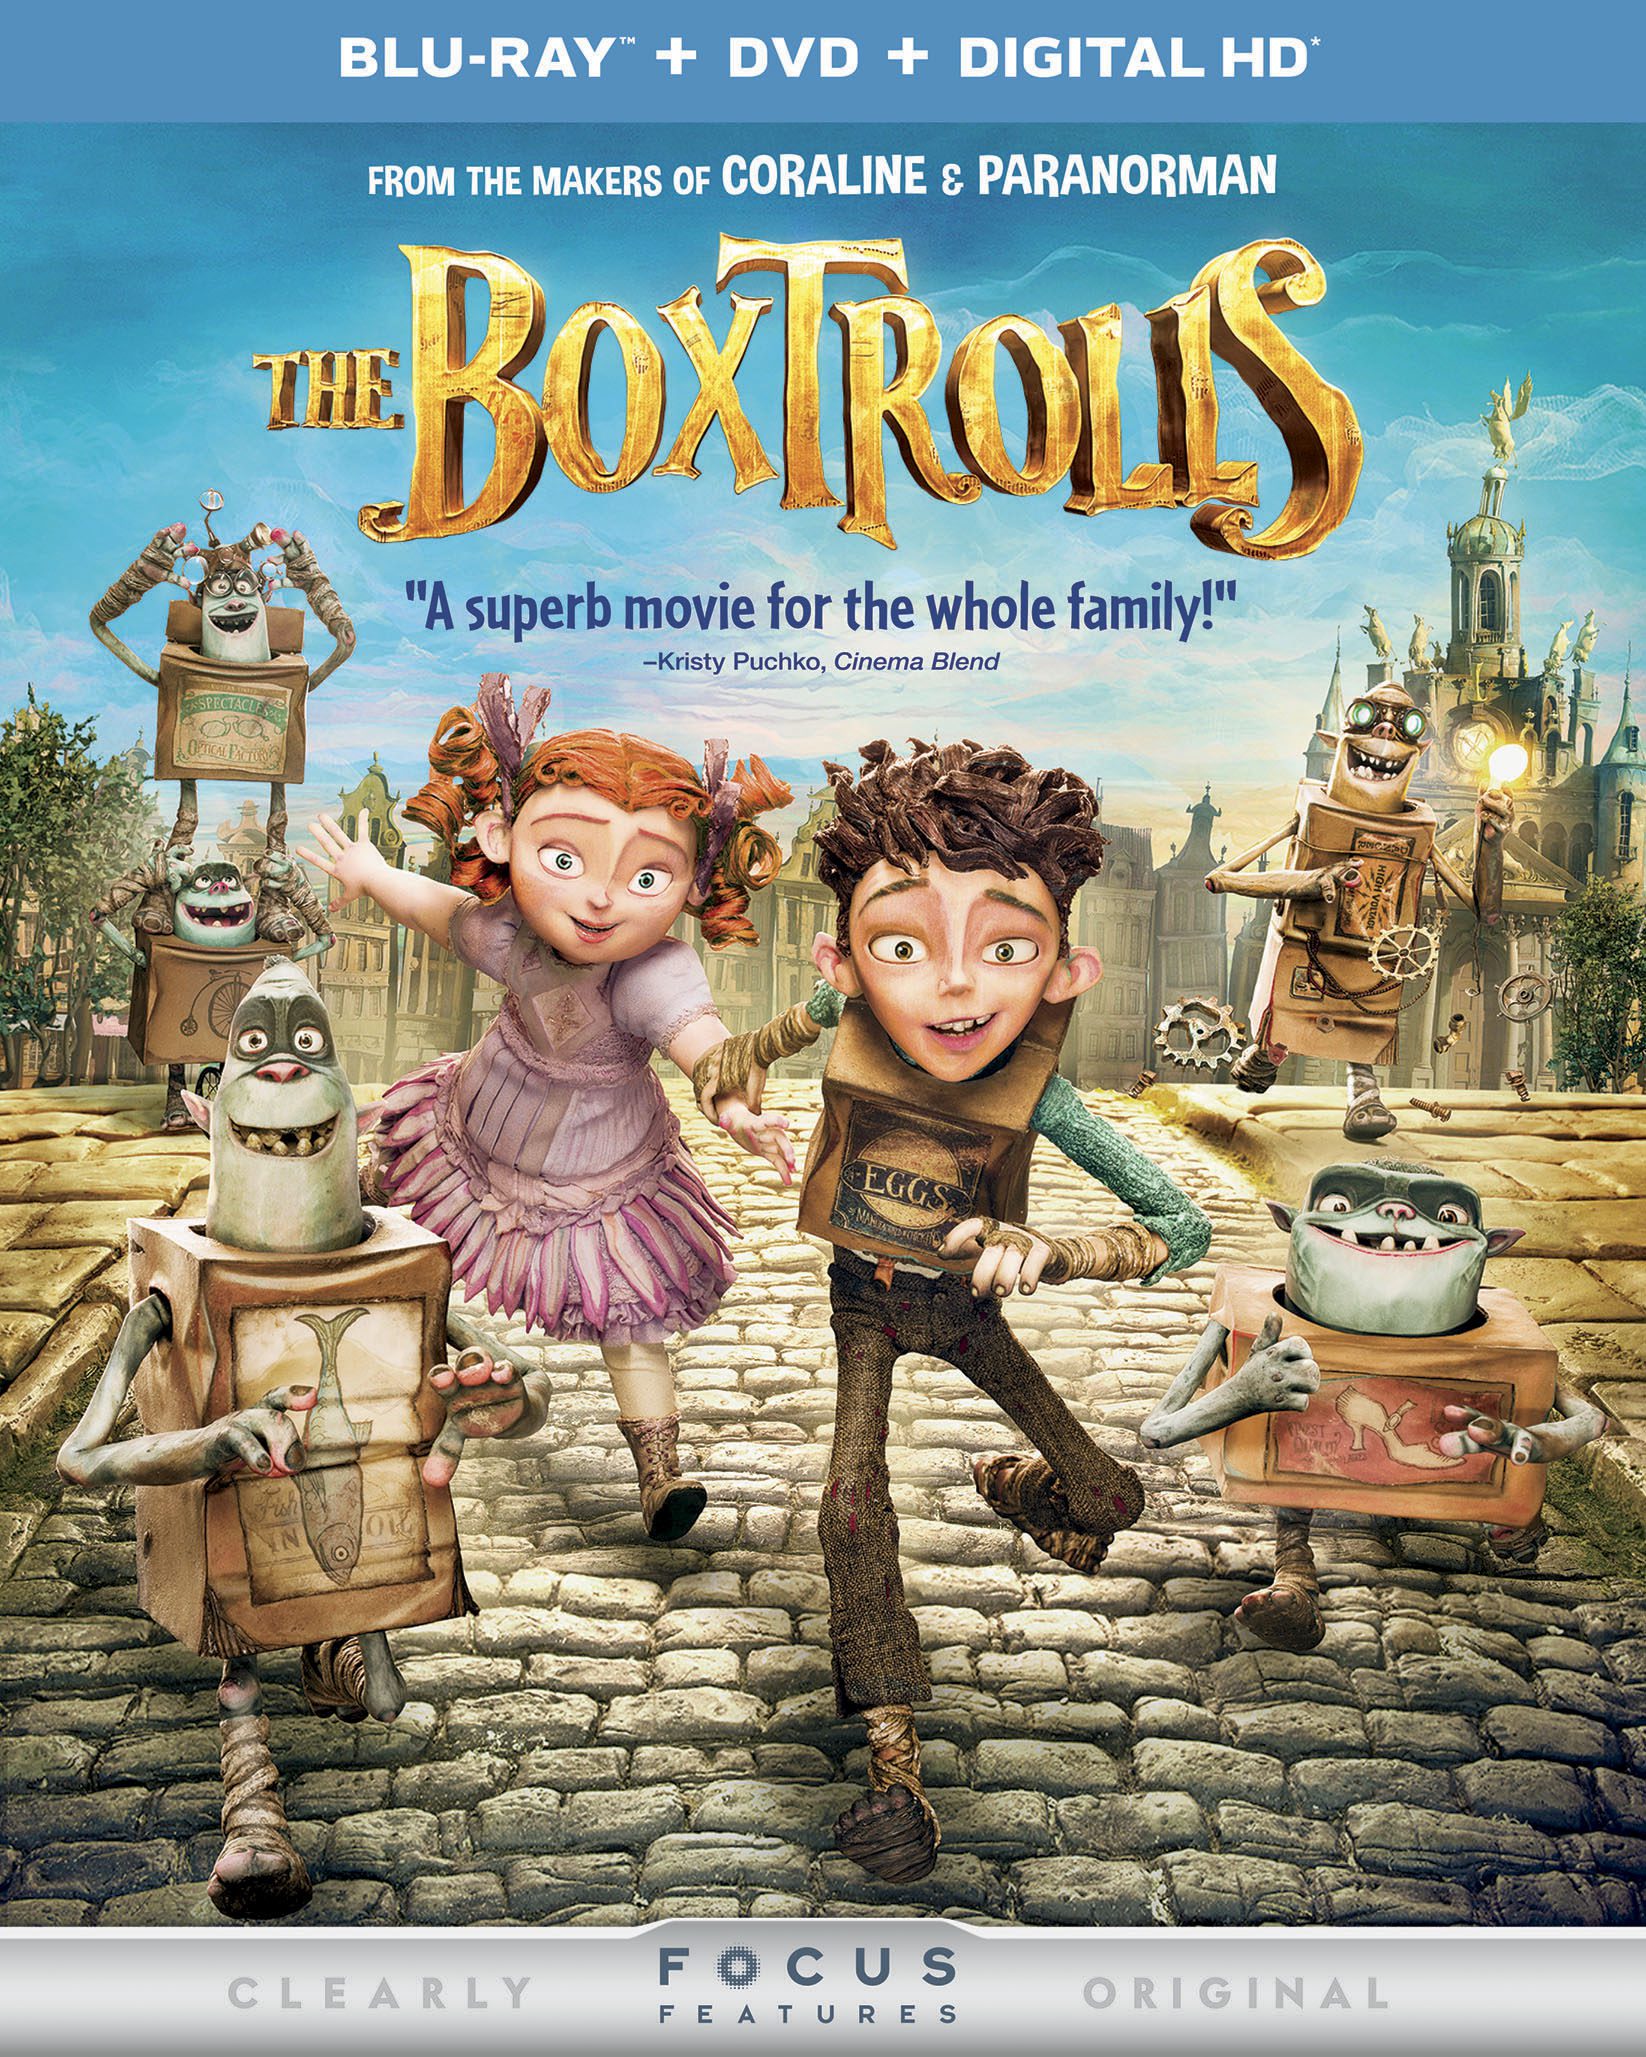 The Boxtrolls Are Coming to DVD and Blu-ray on January 20, 2015